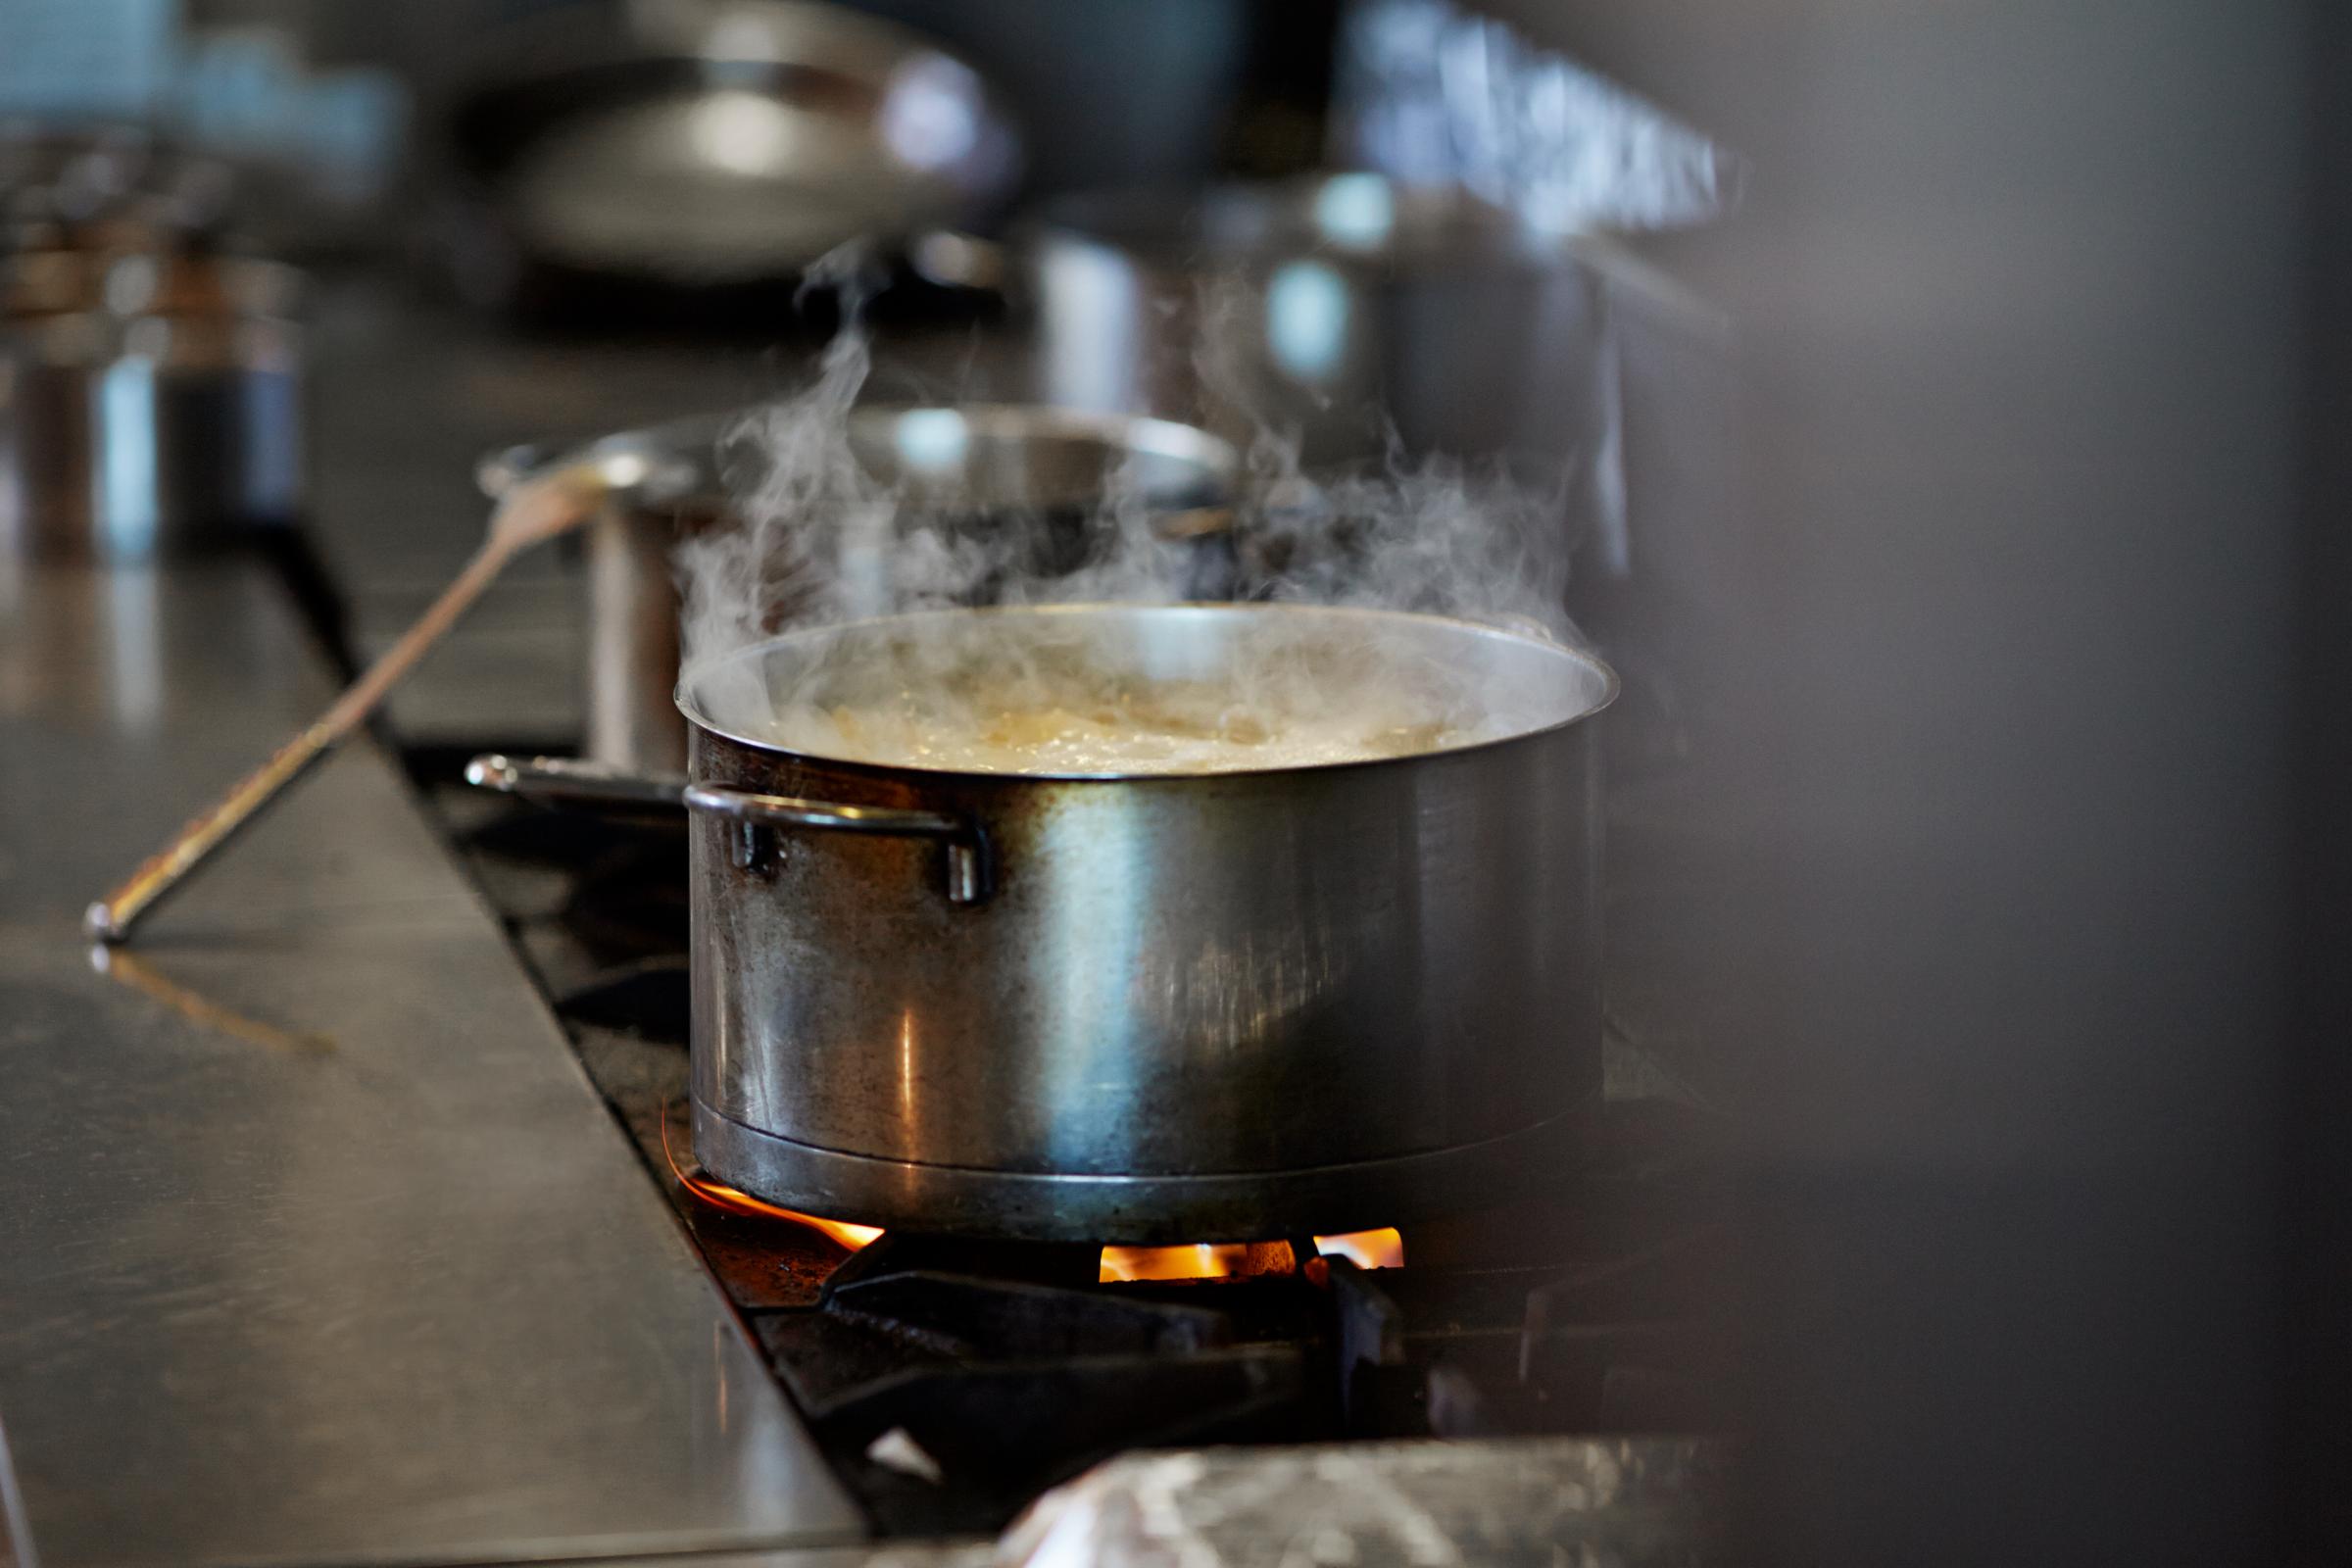 Font cooking on stow in kitchen at restaurant